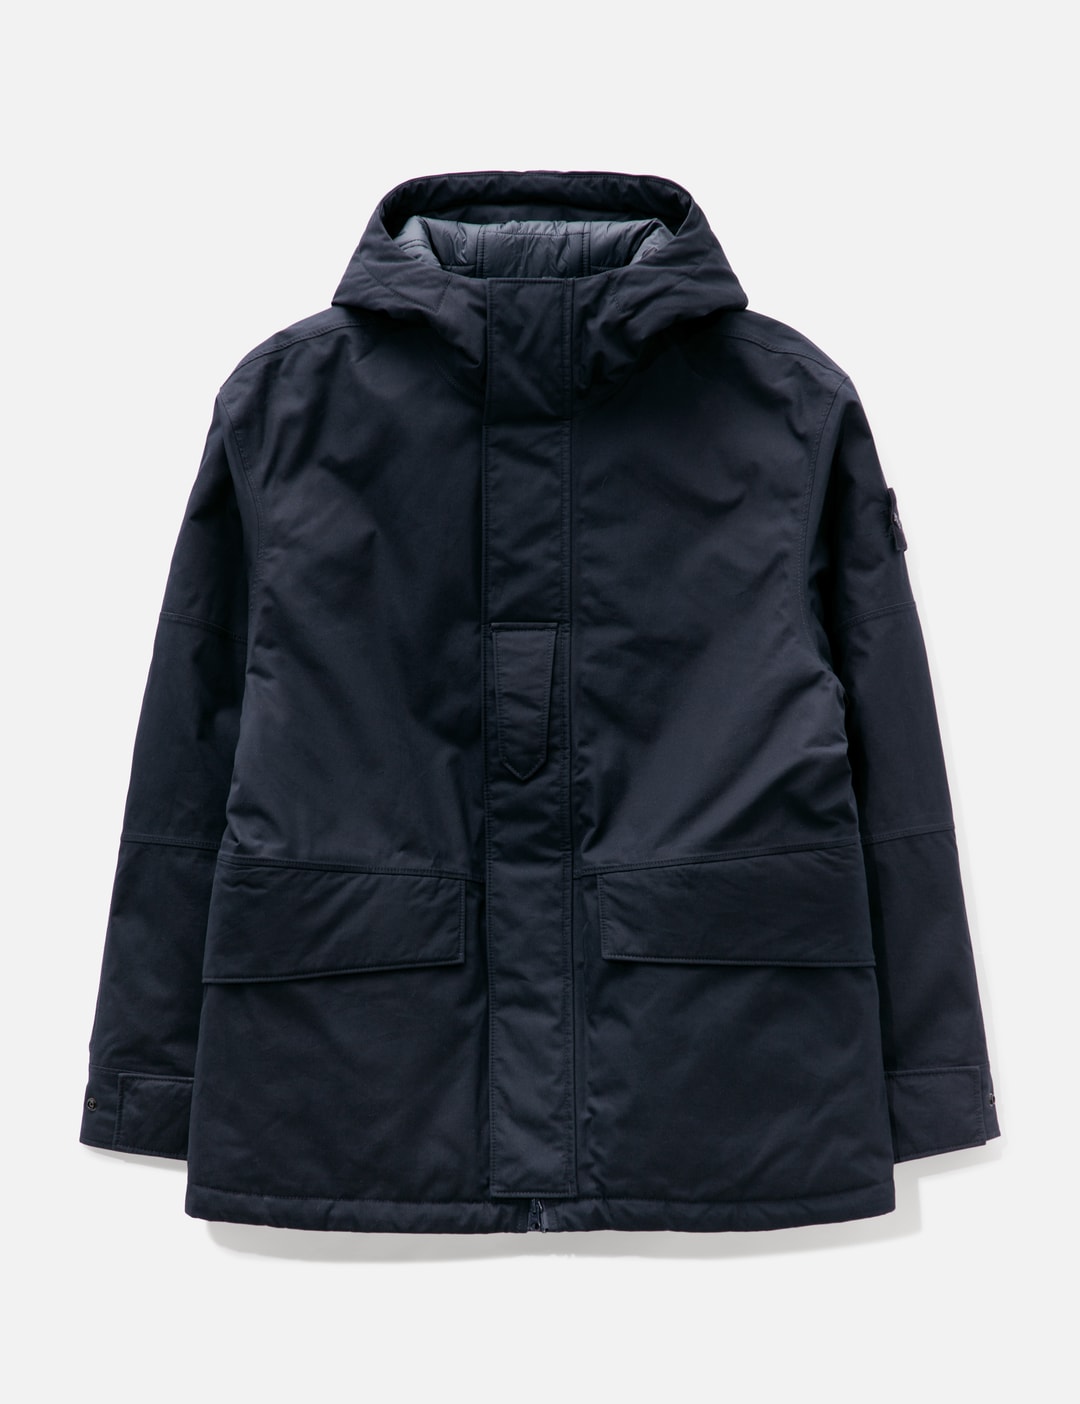 Stone Island - O-VENTILE® Ghost Piece Parka | HBX - Globally Curated ...